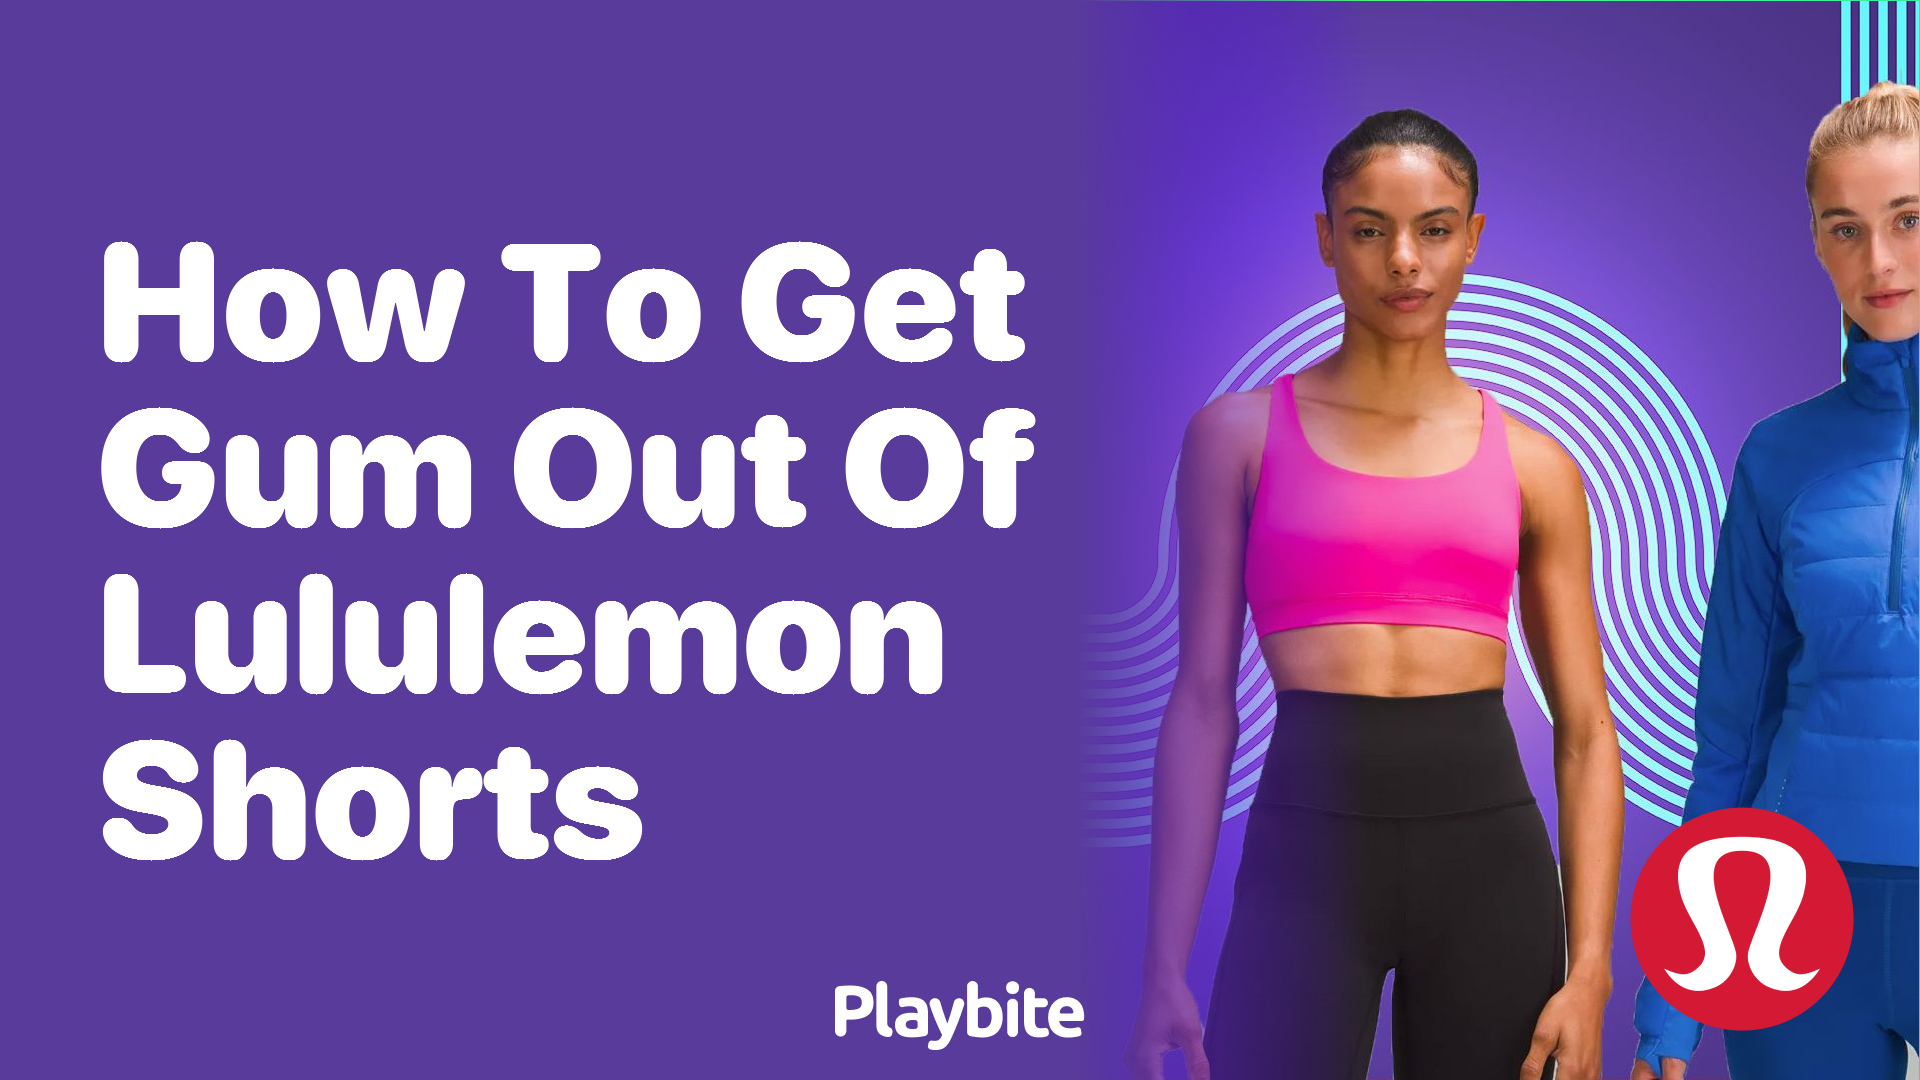 Do Your Lululemon Pants Rub? Here's What You Need to Know - Playbite